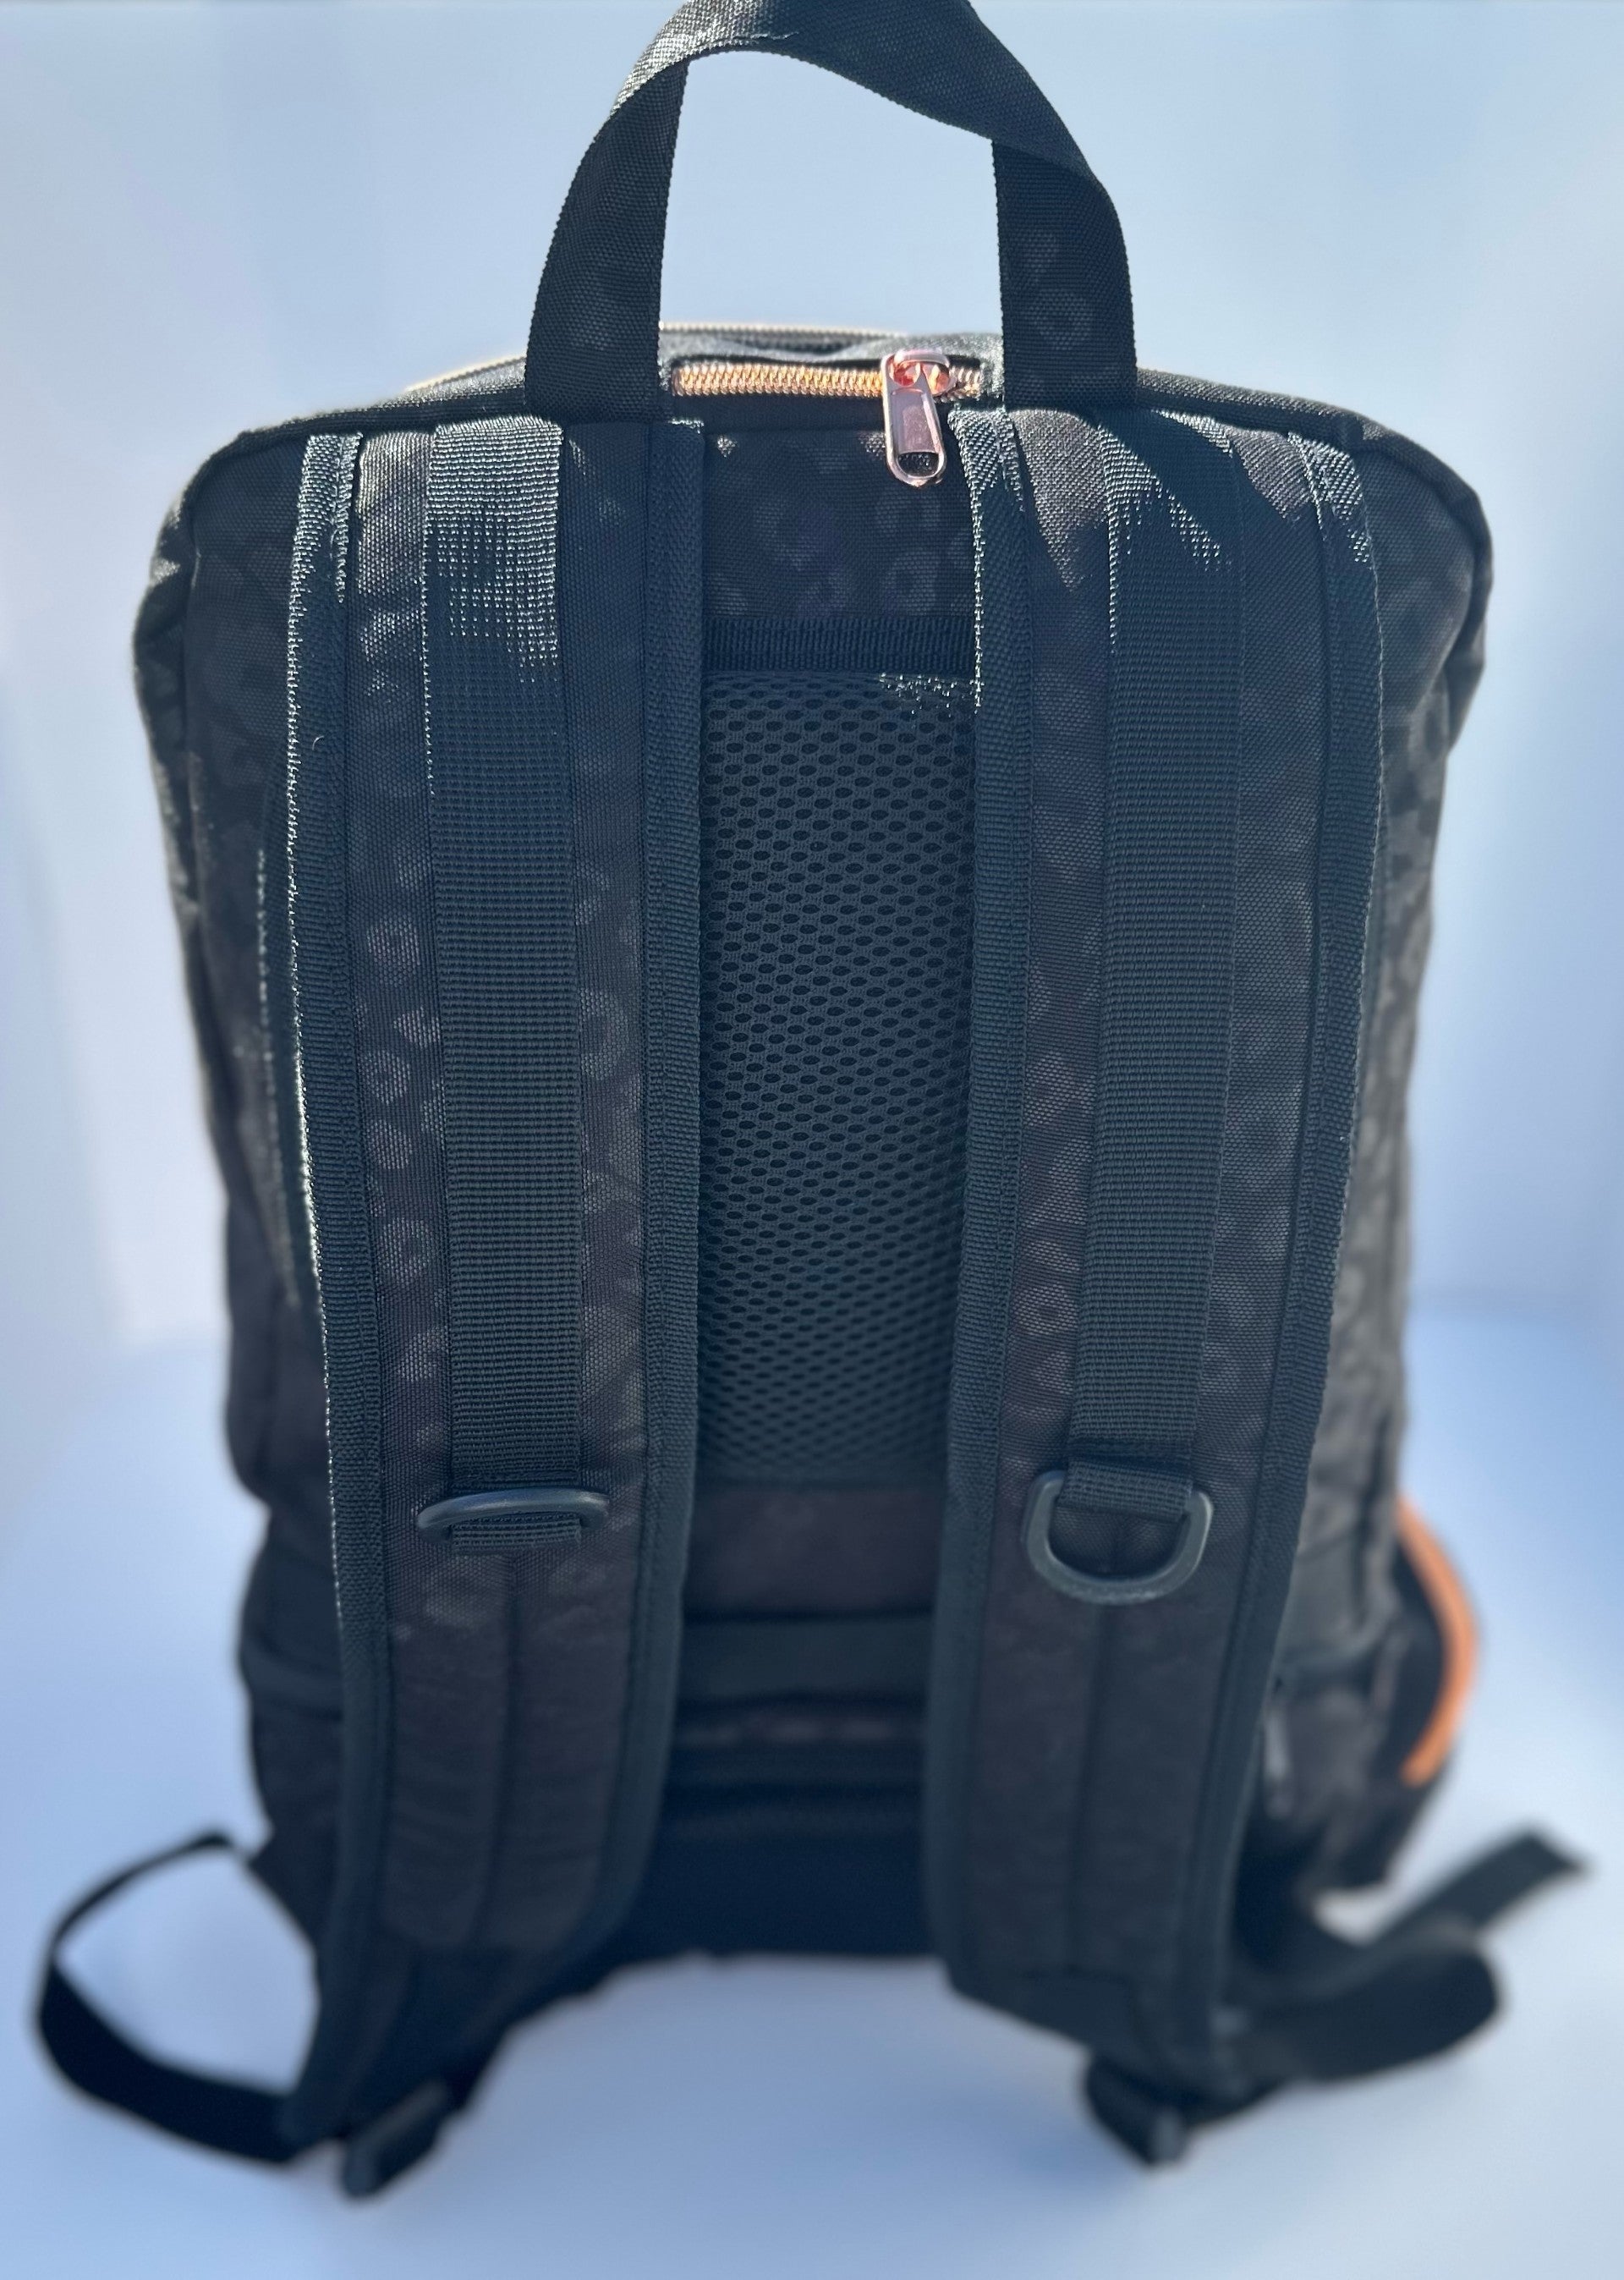 Chlo's "ALL-IN-ONE" Backpack & Cooler (Coming Soon)